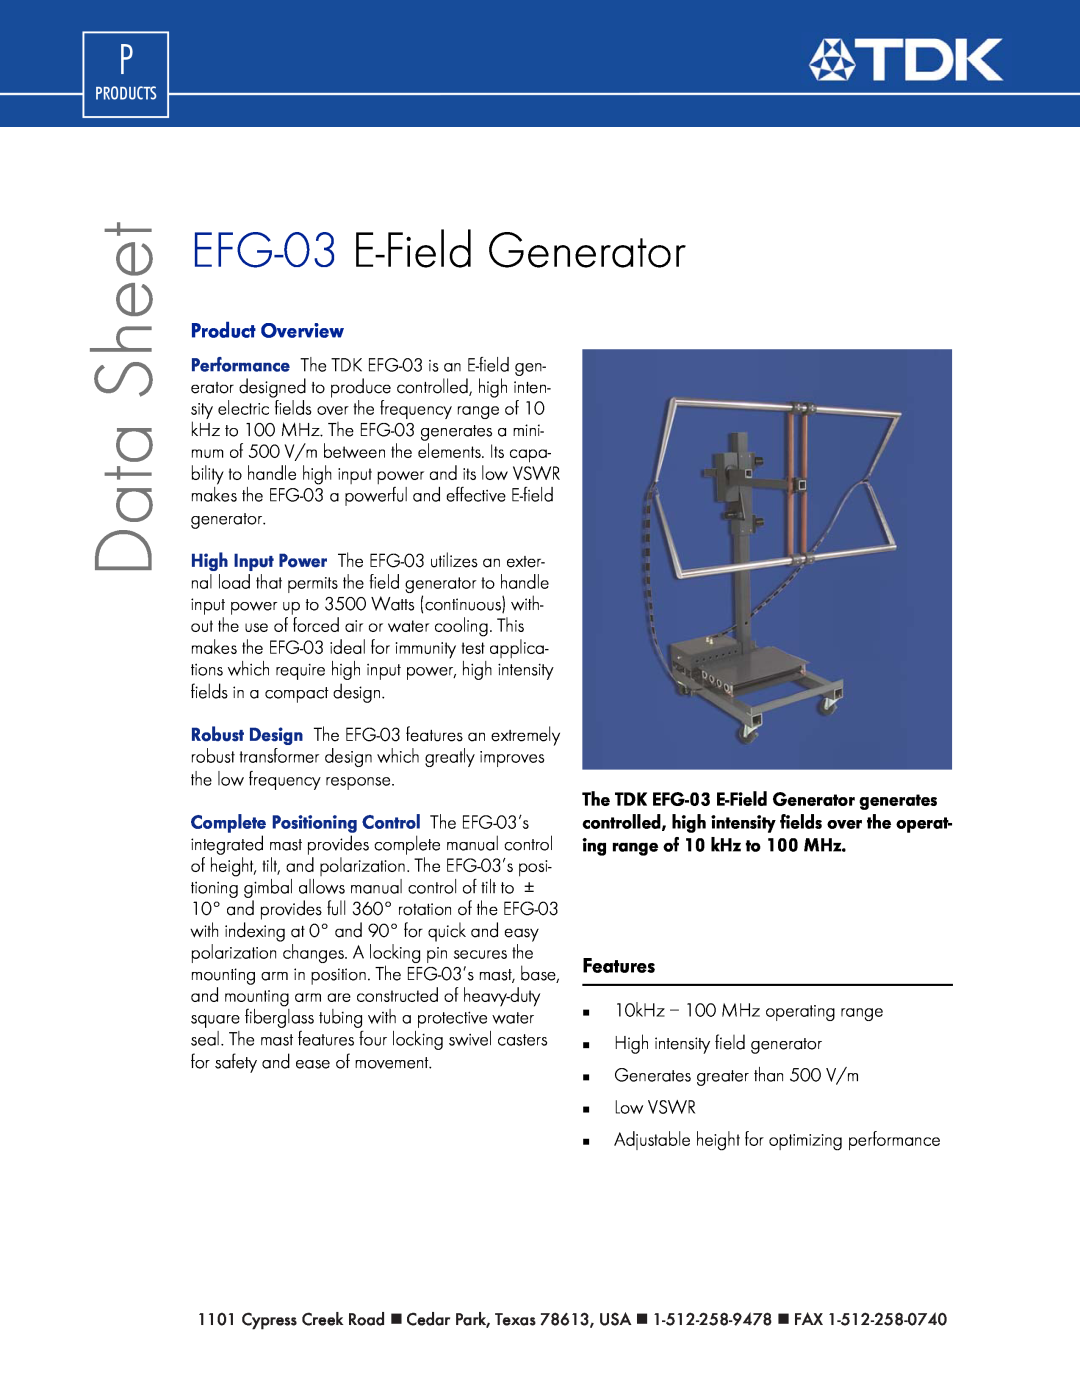 TDK manual EFG-03 E-FieldGenerator, Features, Data, Sheet, Product Overview, Products 